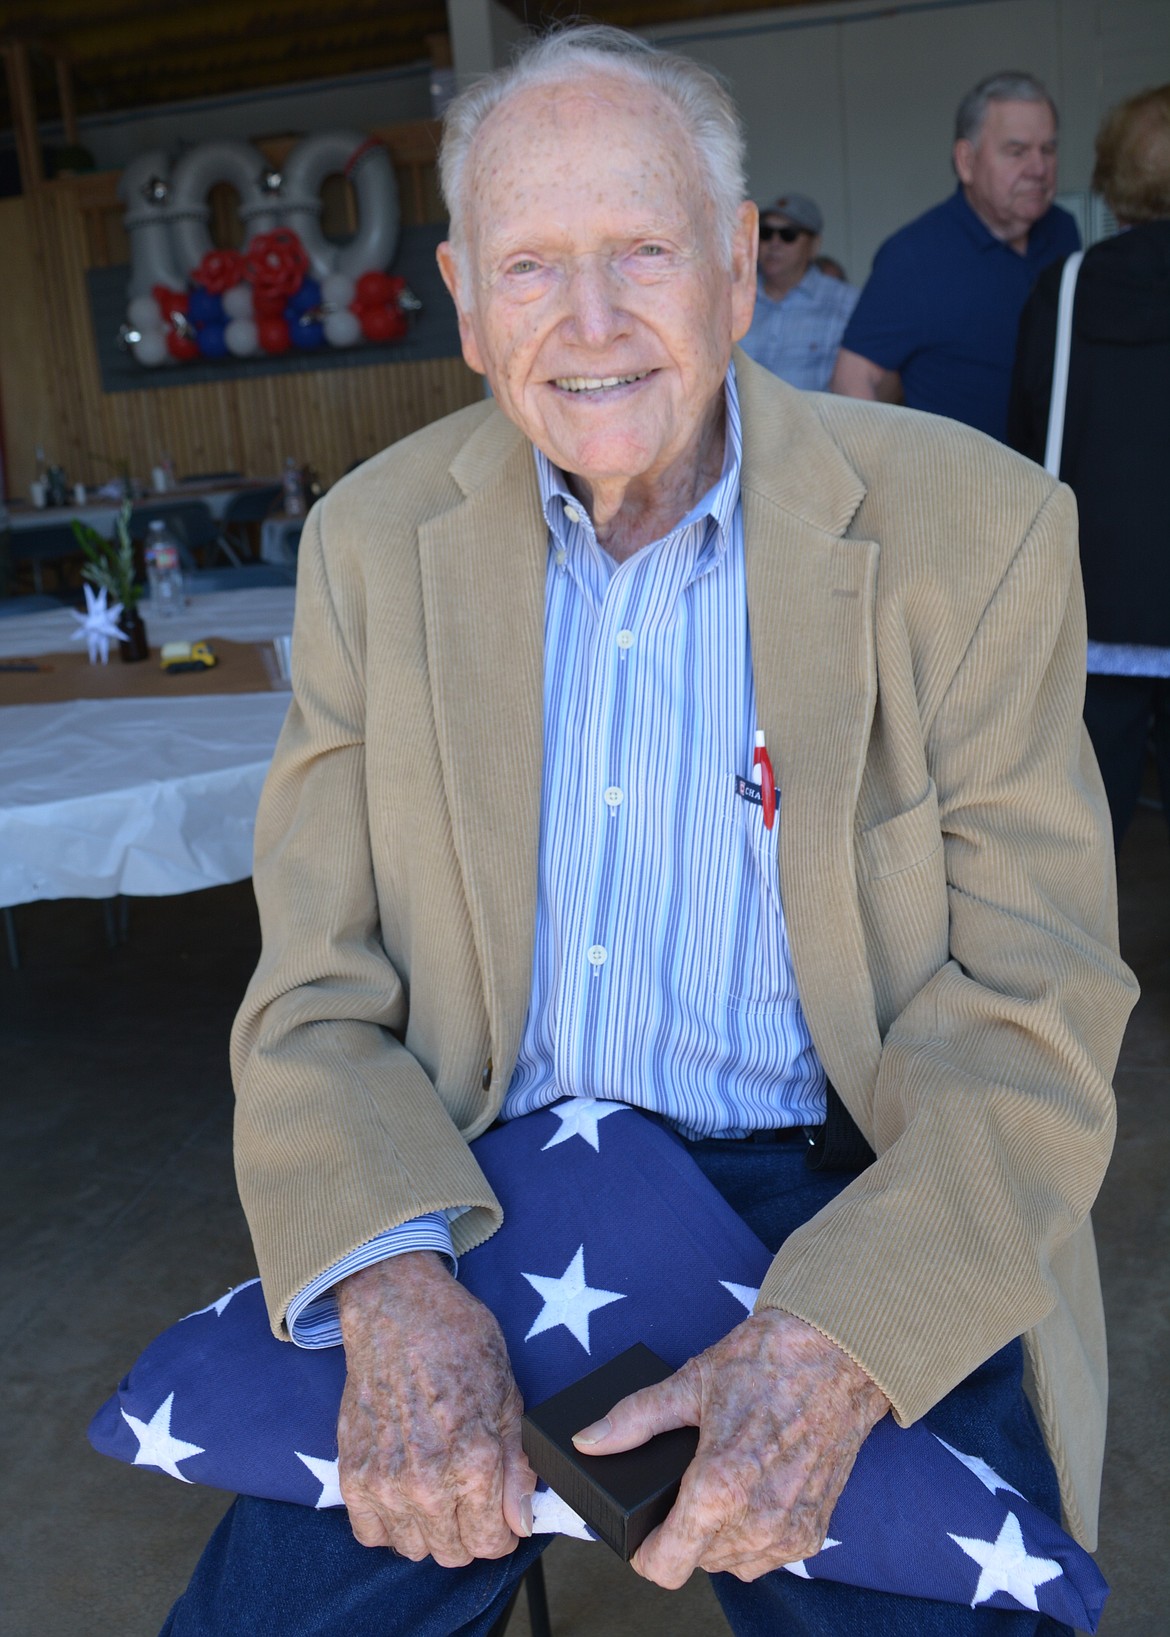 Robert Gwin was honored by a state proclamation on his 100th birthday for his WWII service as a radio operator in Burma.